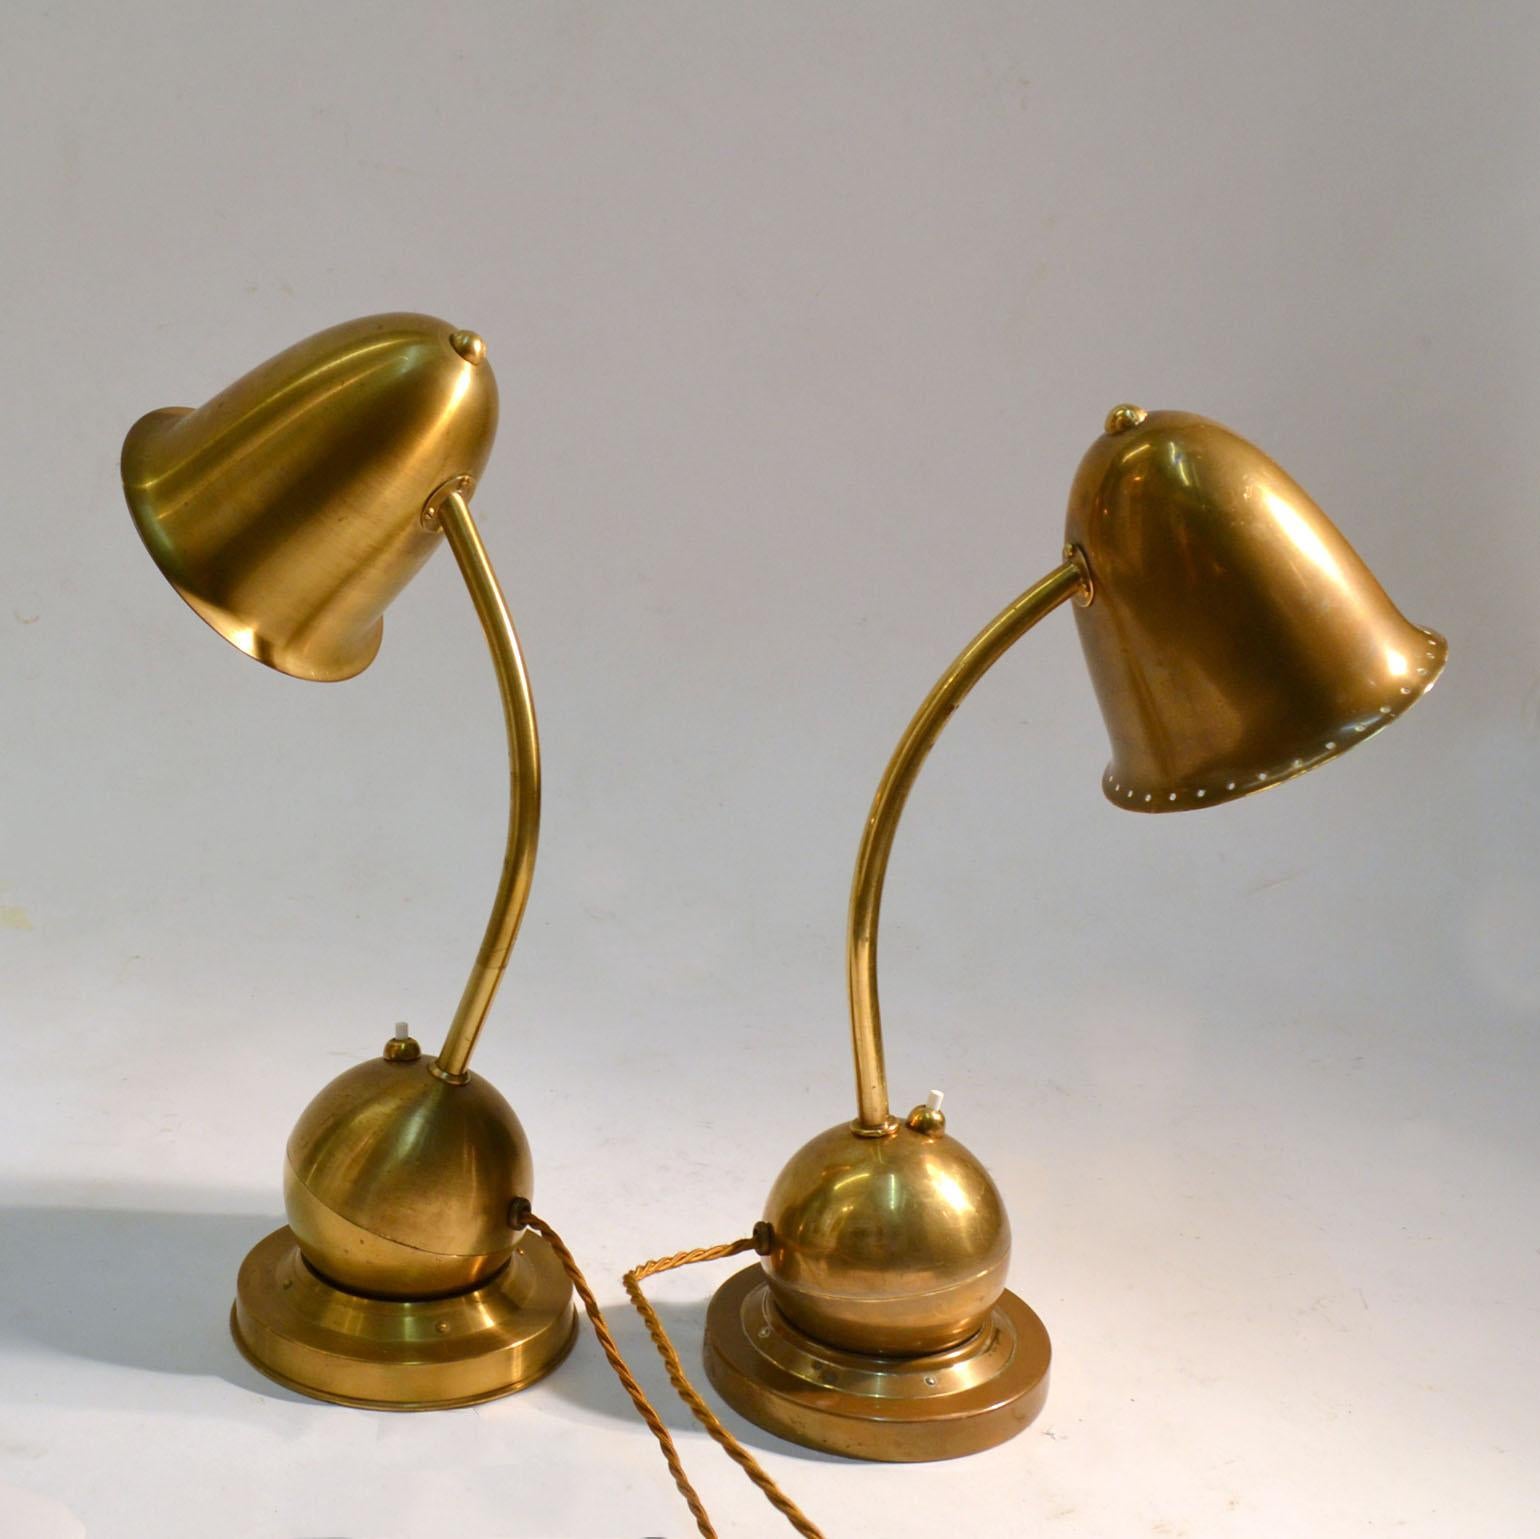 Pair of Modernist Brass Table / Desk Lamps 1930s Lamps by Daalderop Netherlands 2